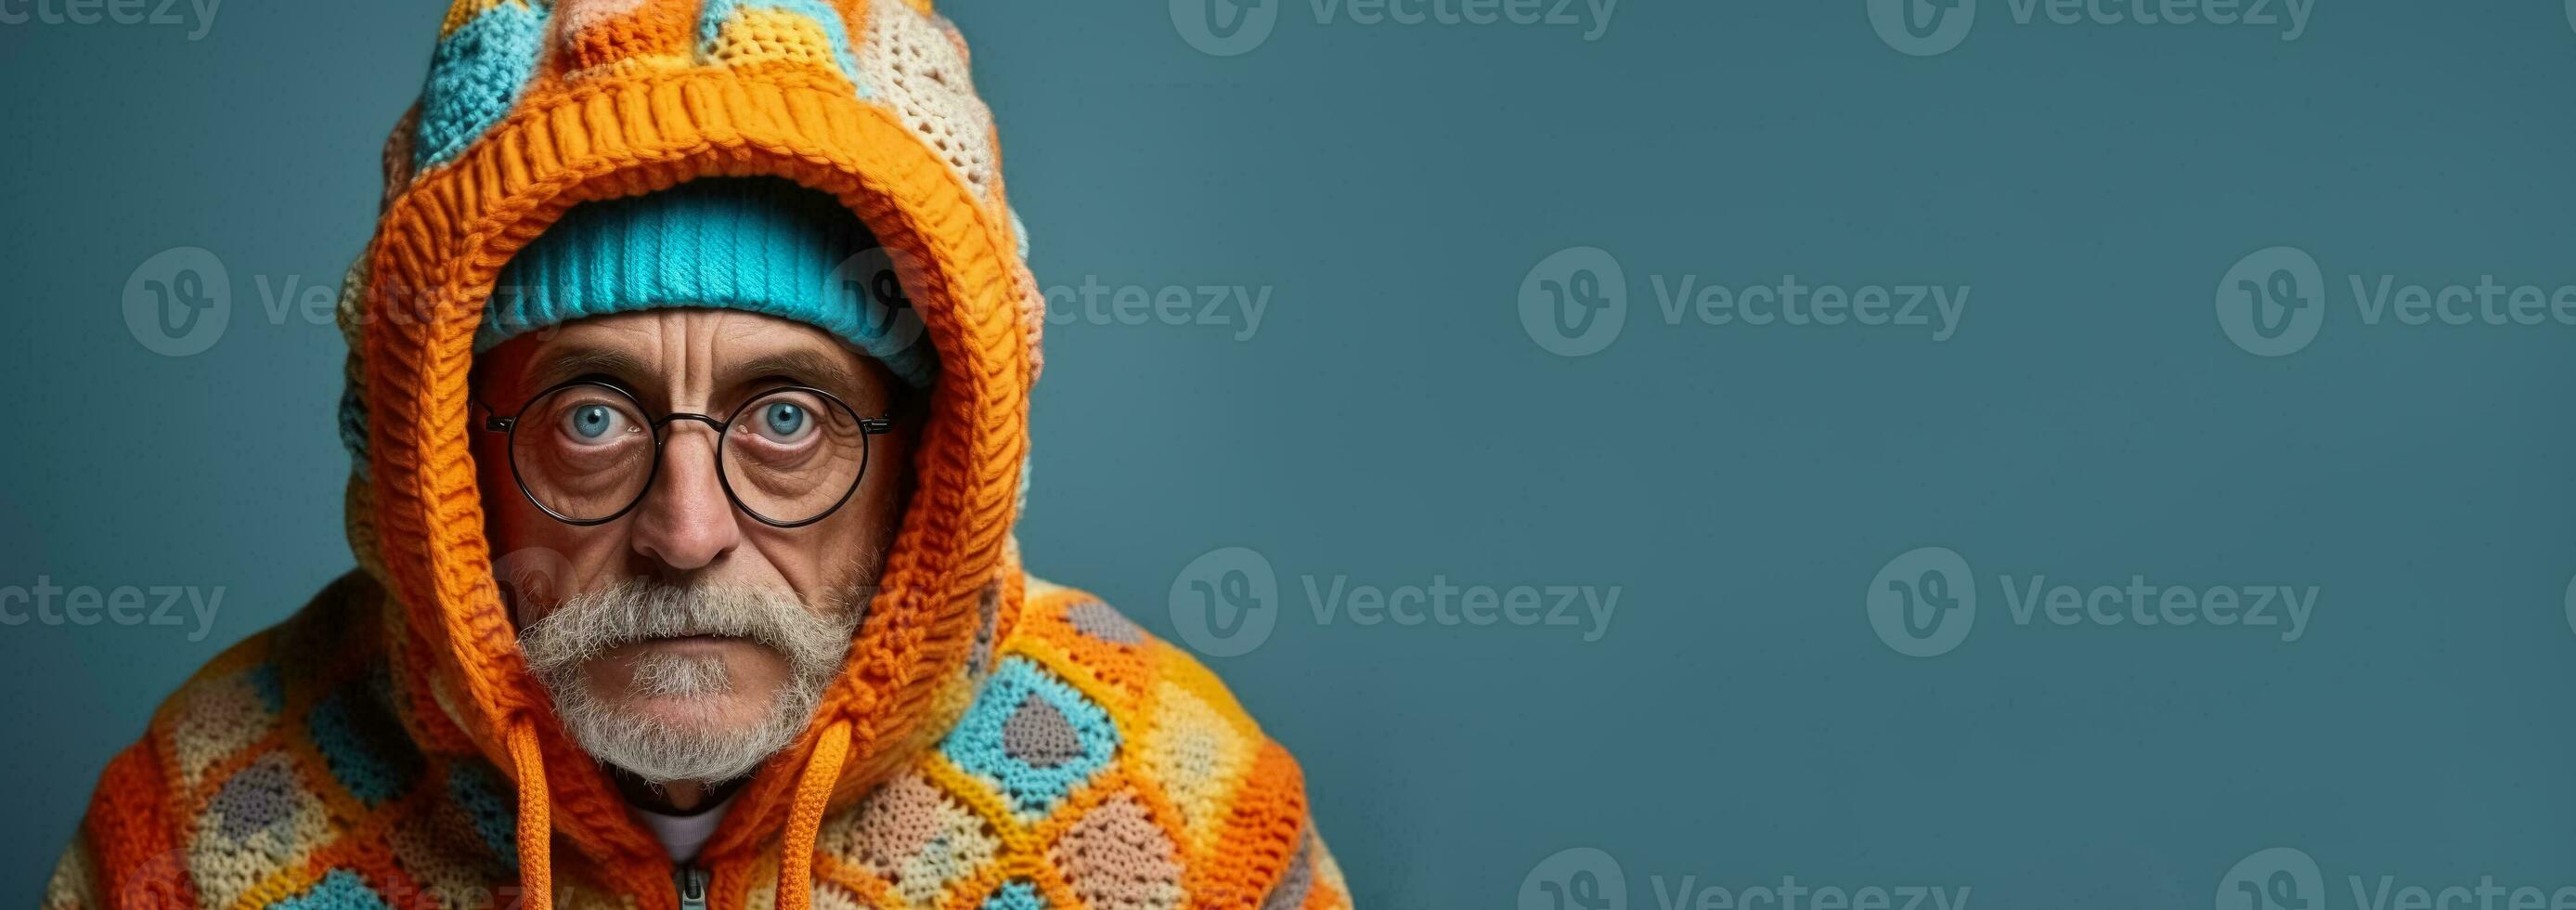 Old man in full knitted cozy costume isolated on vivid background with a place for text photo